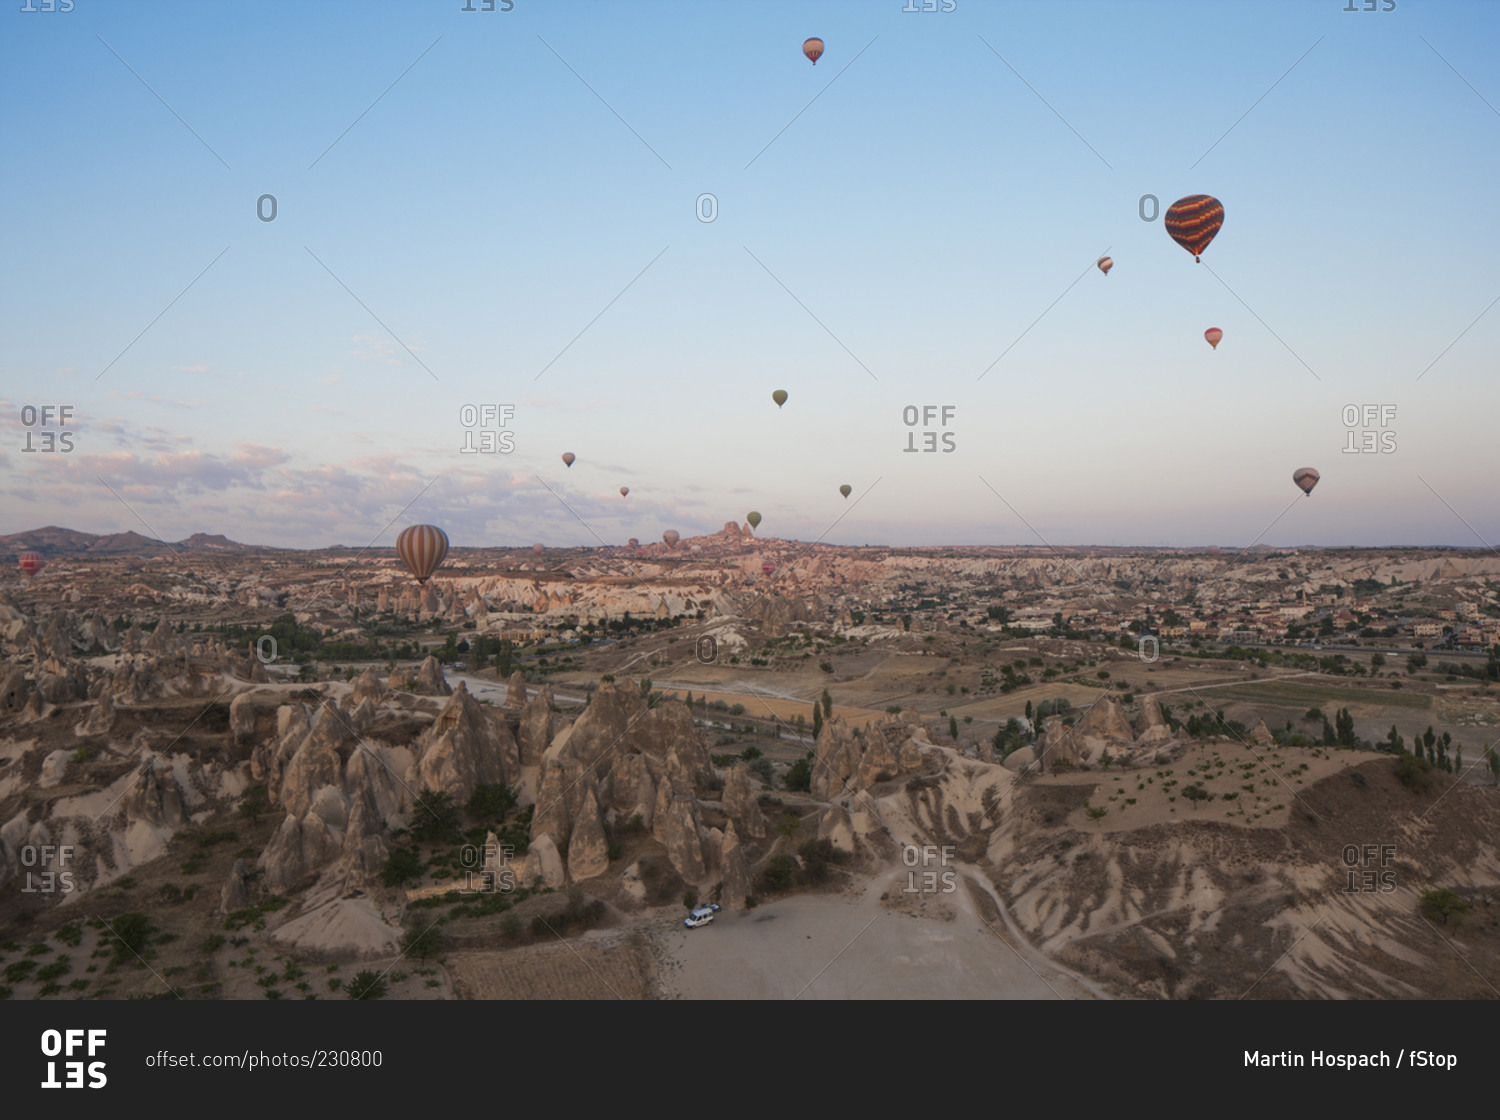 Hot air balloons flying over dramatic landscape